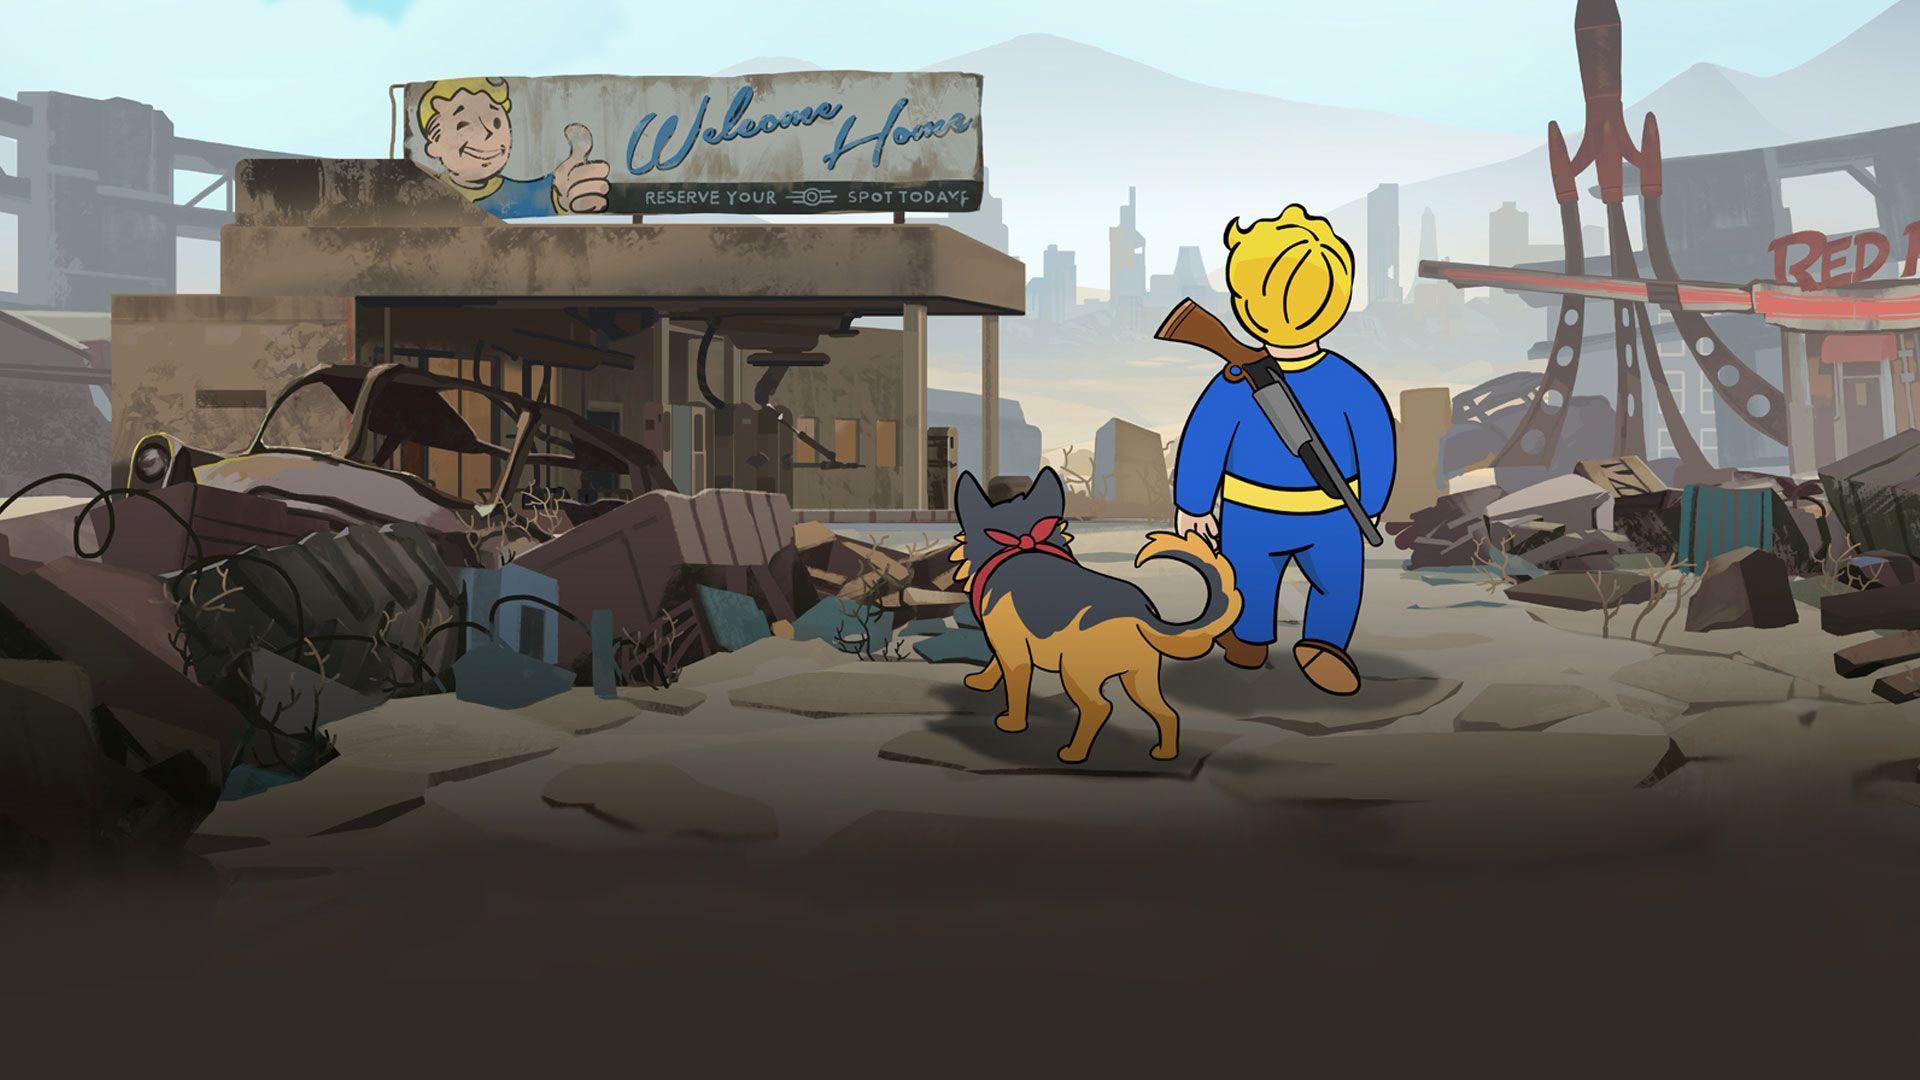 download fallout shelter for free